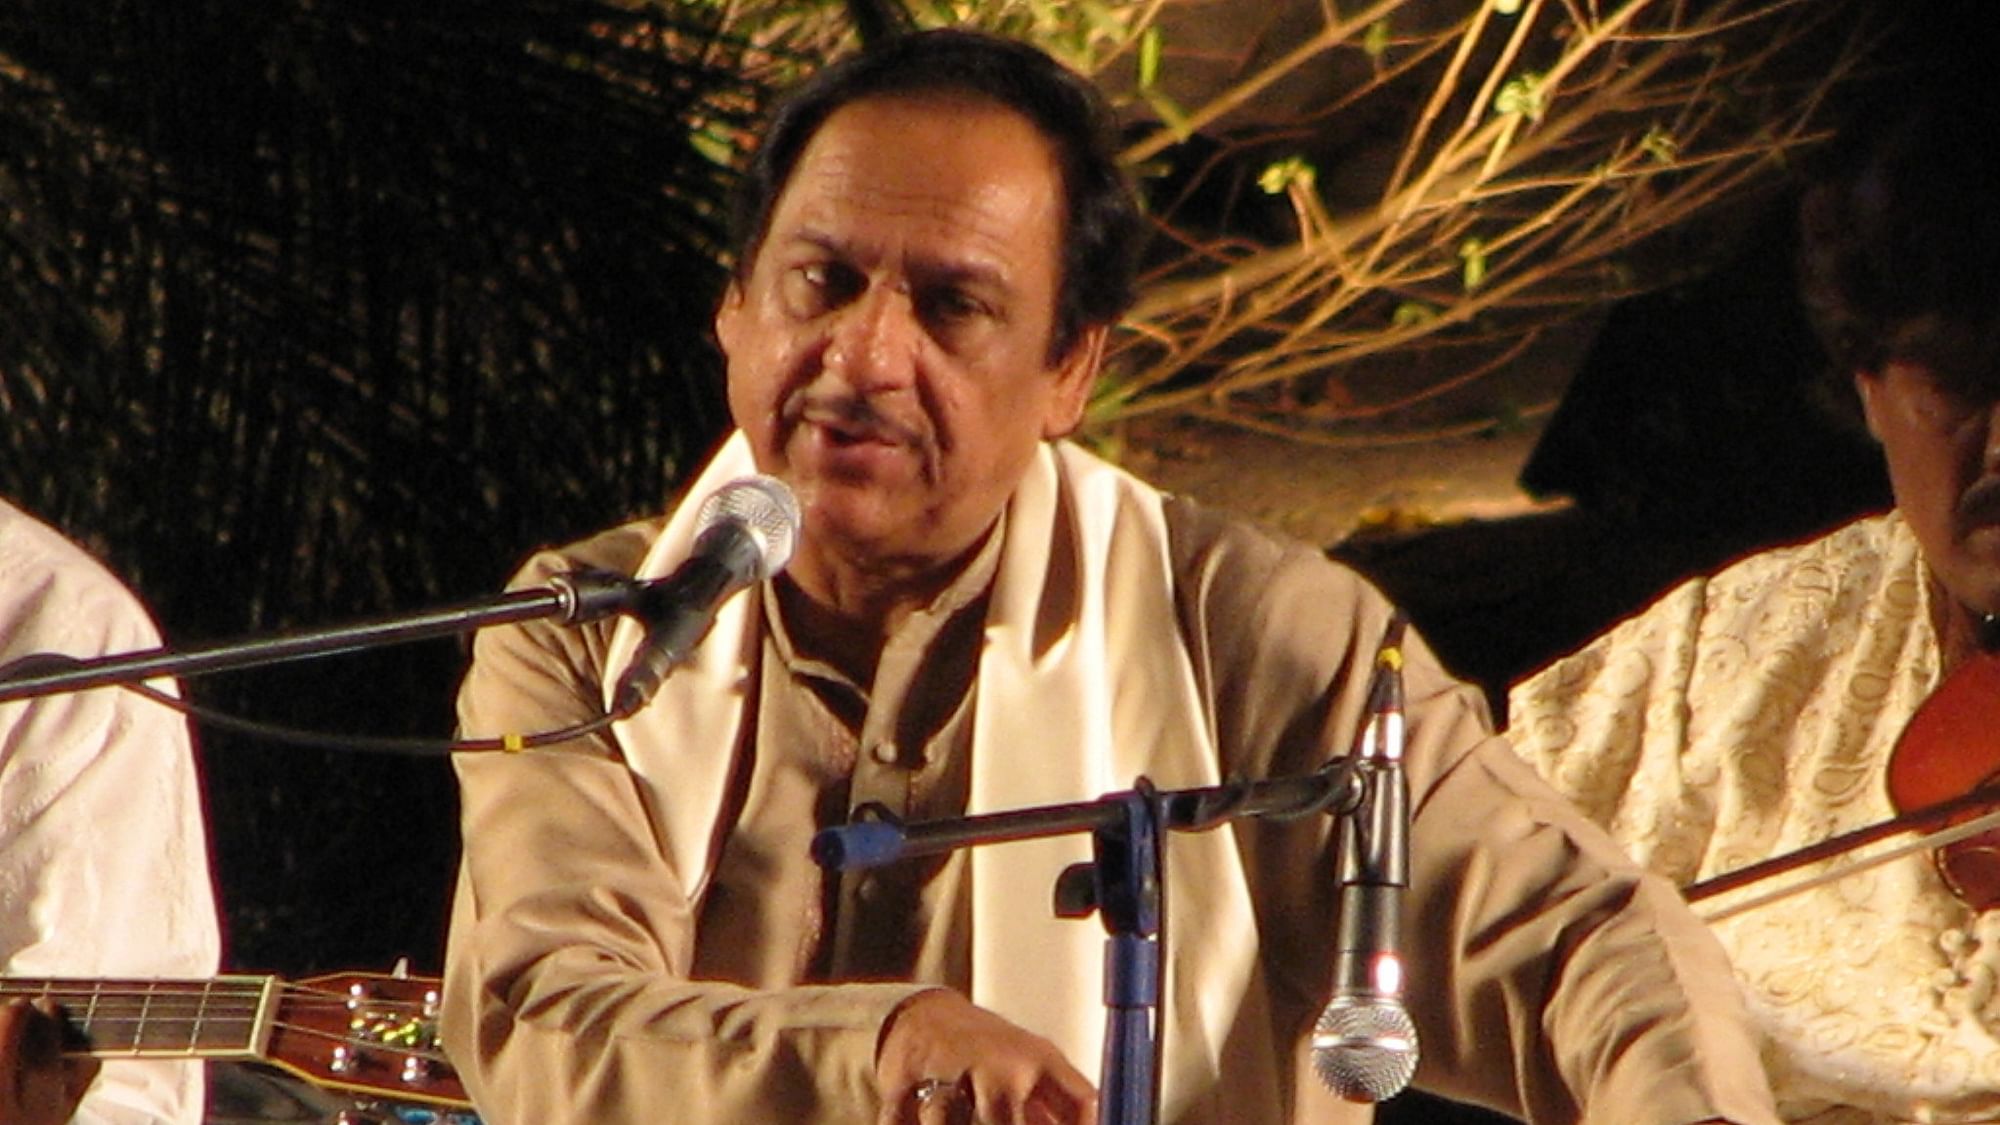 File photo of Ghulam Ali in a concert at Rock Heights, Hyderabad, on April 6, 2007. (Courtesy: Punit Khanna)